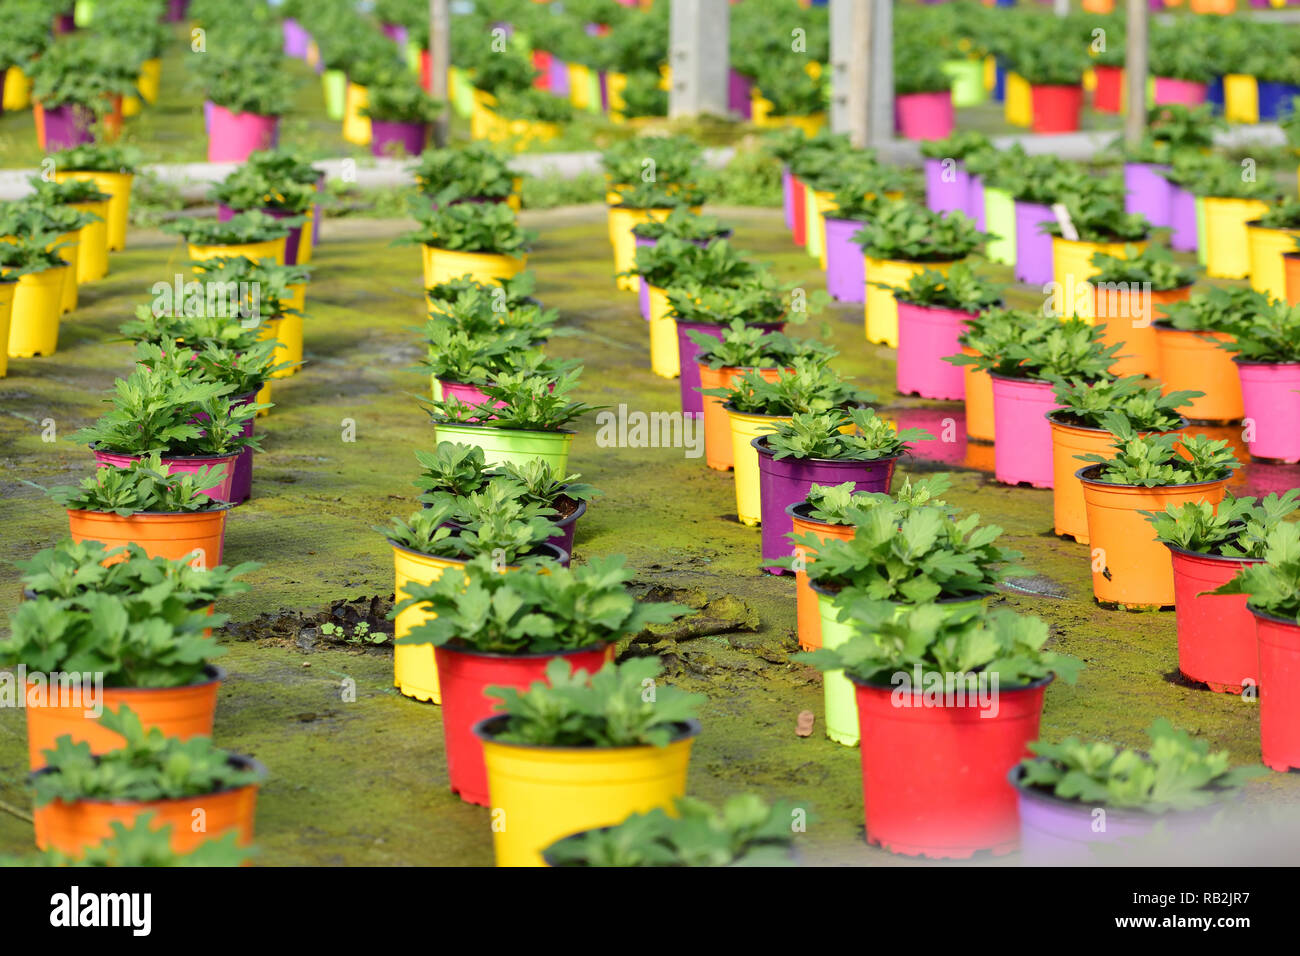 Amazing view of colorful flower pot in a garden Stock Photo